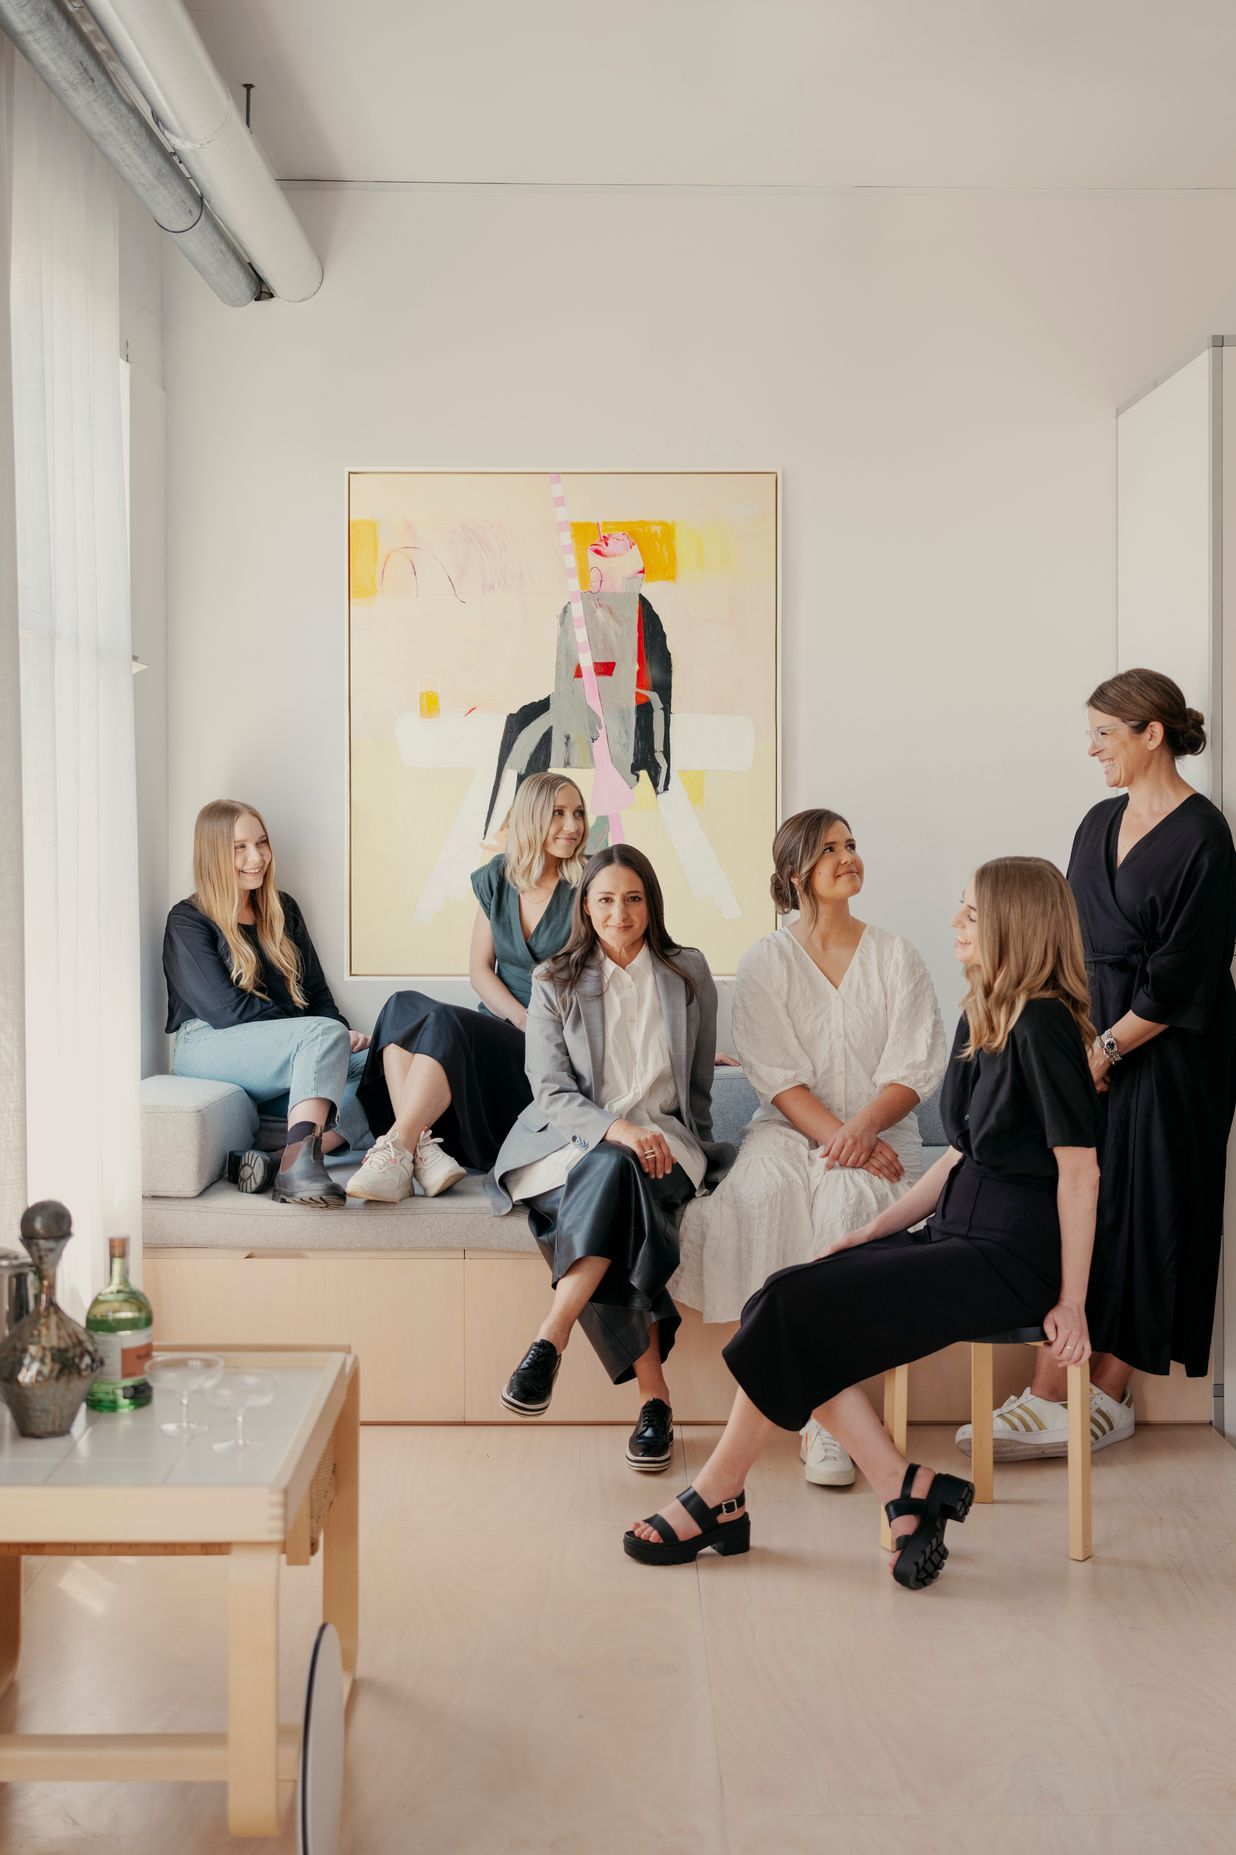 Eva-marie Prineas at her studio with her team | Photography by Felix Forest